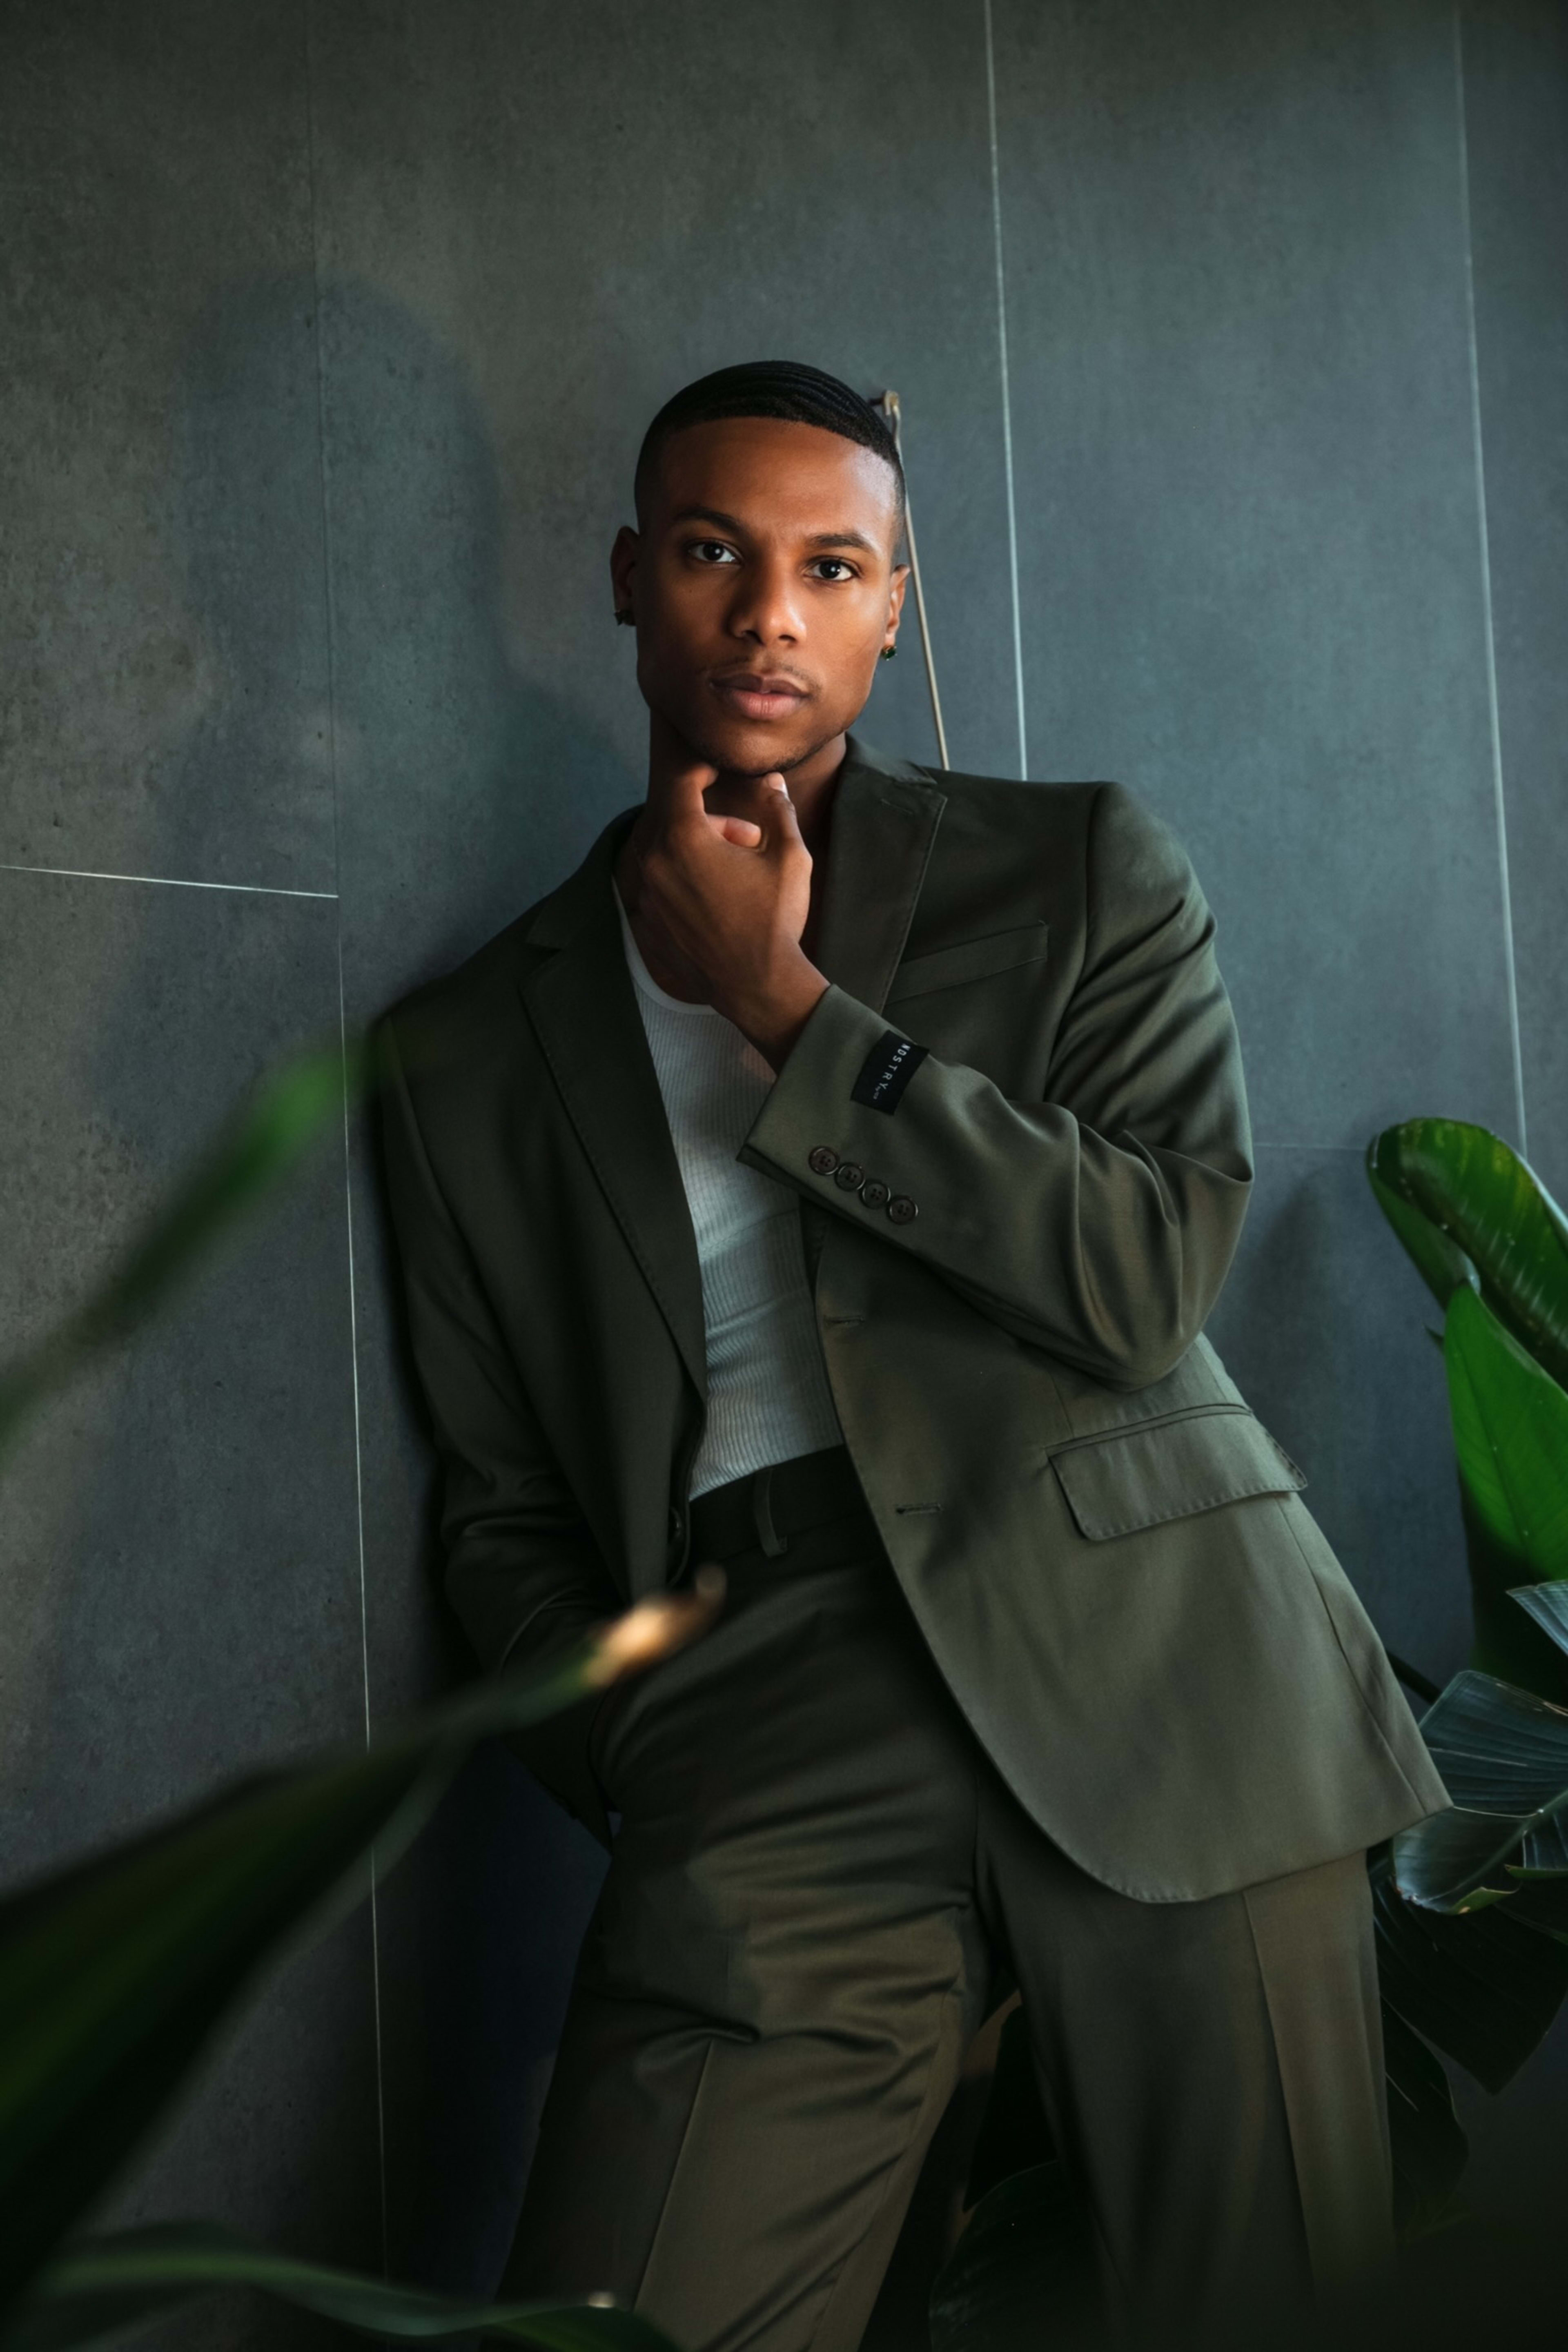 A man in a green suit leaning against a green wall for a fashion photoshoot.